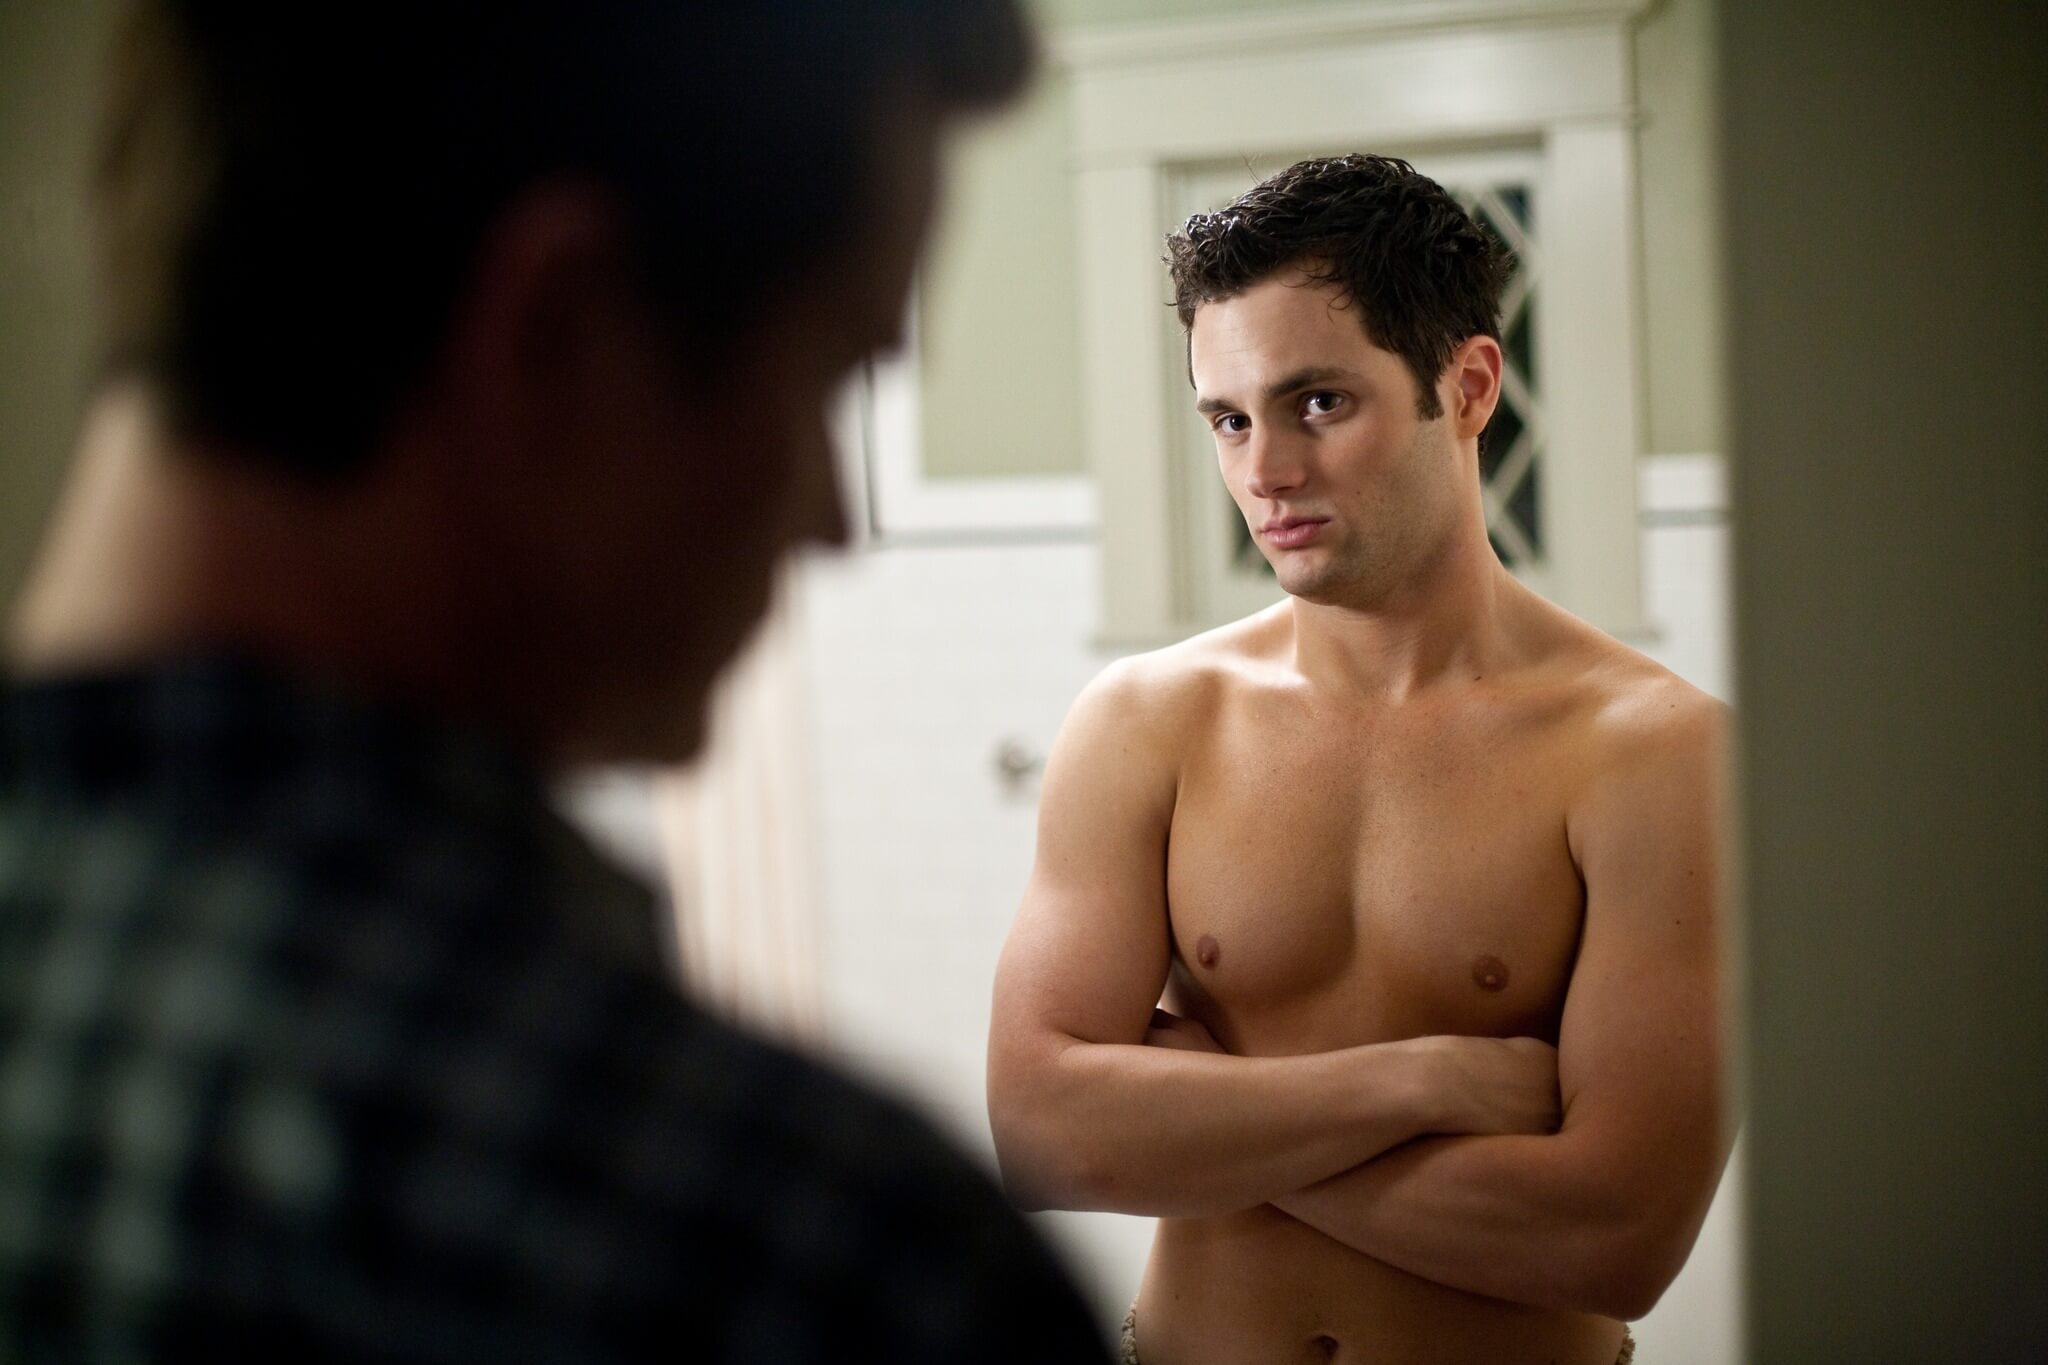 Penn Badgley movies and TV shows